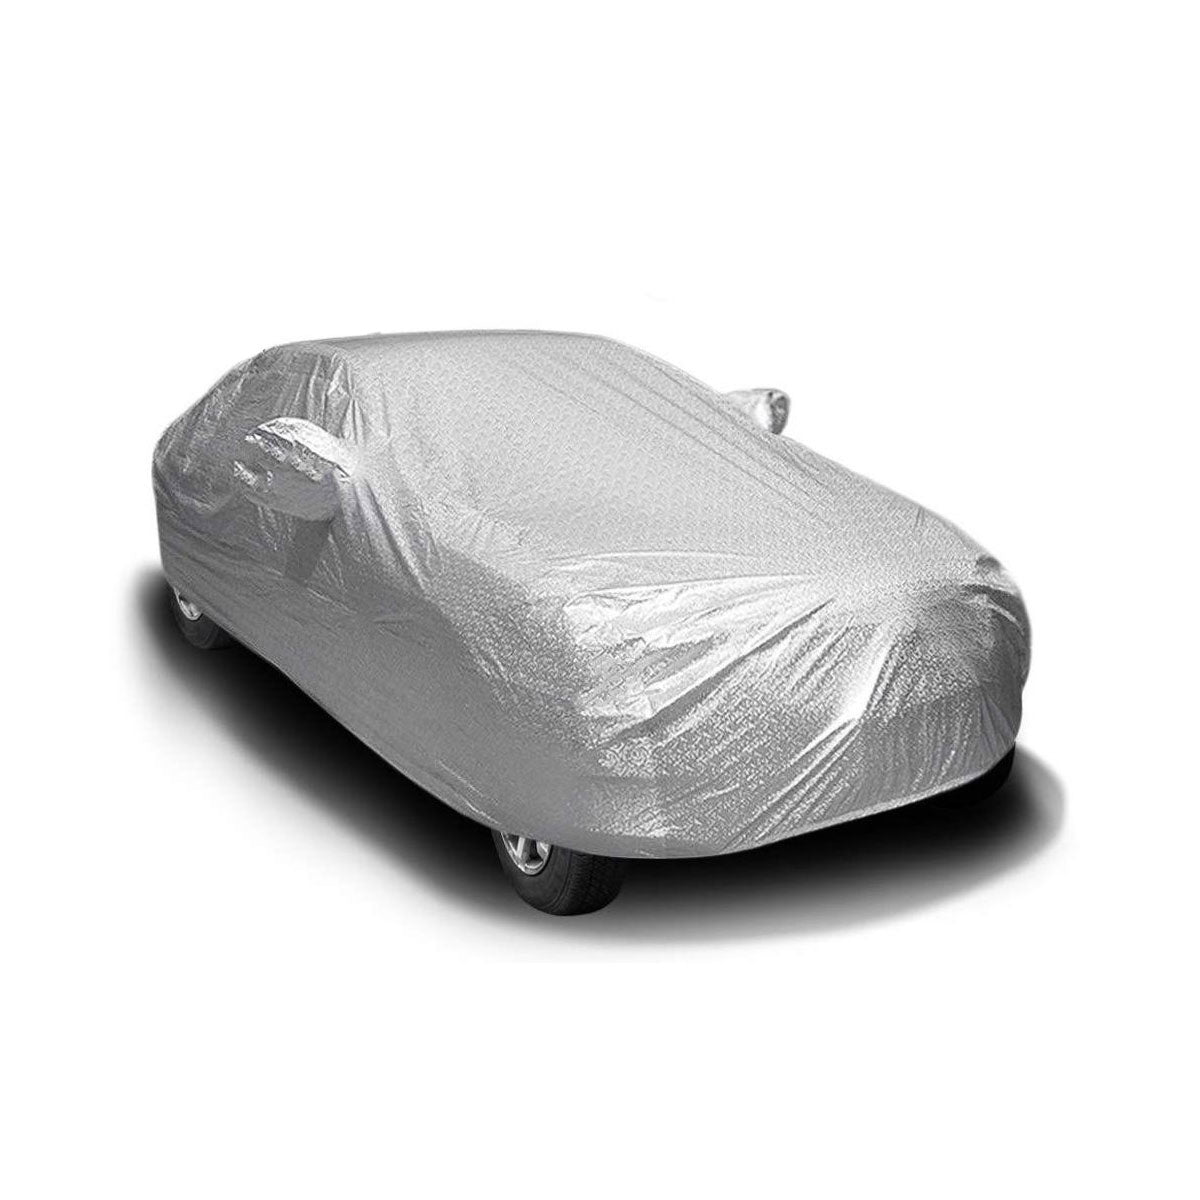 Oshotto Spyro Silver Anti Reflective, dustProof Silver and Water Proof Silver Car Body Cover with Mirror Pockets For Audi A3